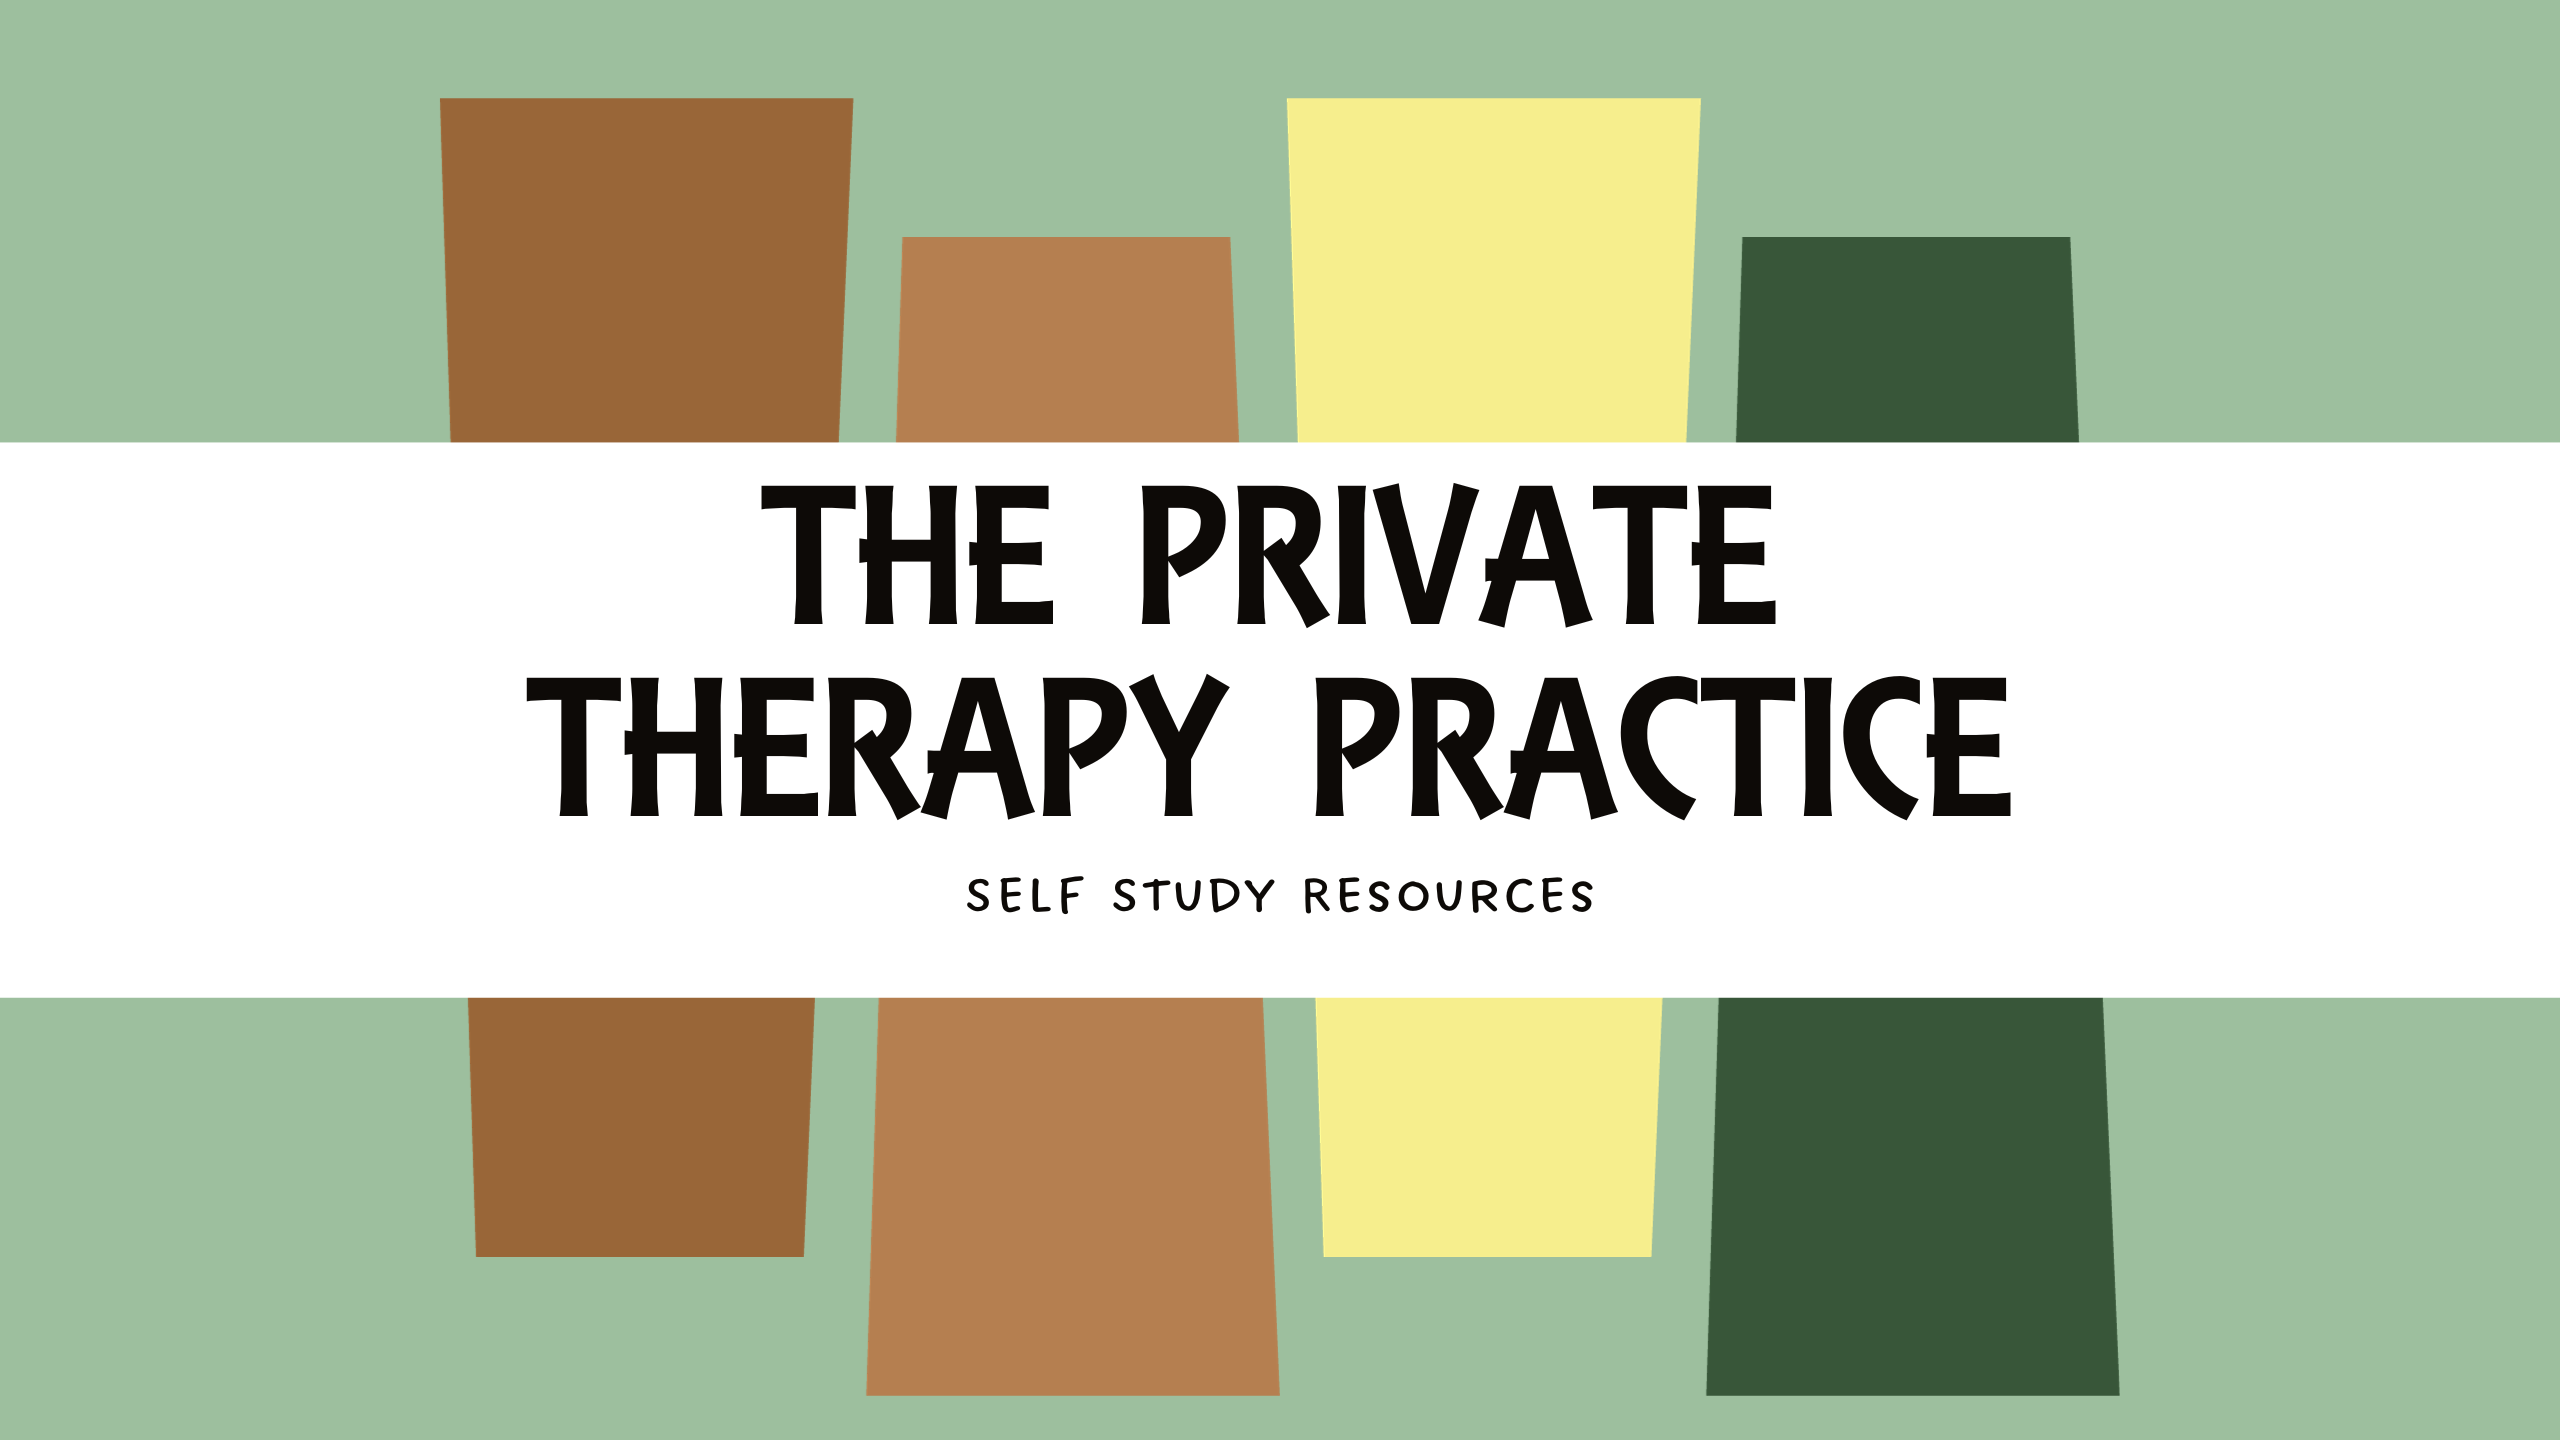 The Private Therapy Practice